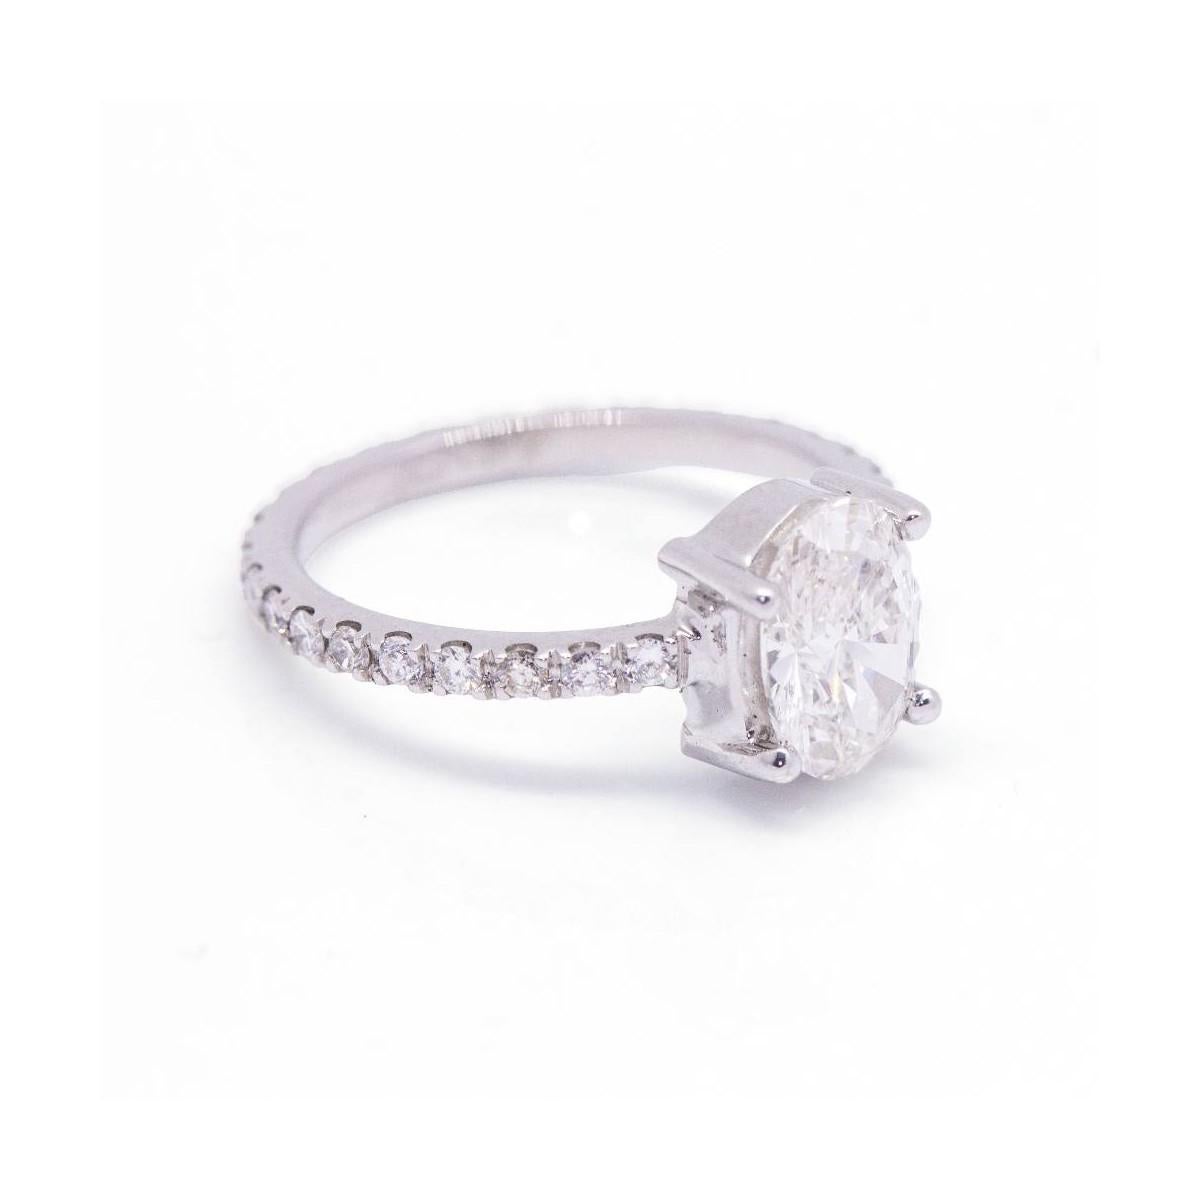 Ring in White Gold for woman  1x Oval Cut Diamonds, weight 1.01cts., quality H/Vs (With GIA Certificate). Accompanied by a pave of diamonds with a total weight of approx. 0.40ct.  Size 7  18kt White Gold  2.40 grams.  This ring is in excellent